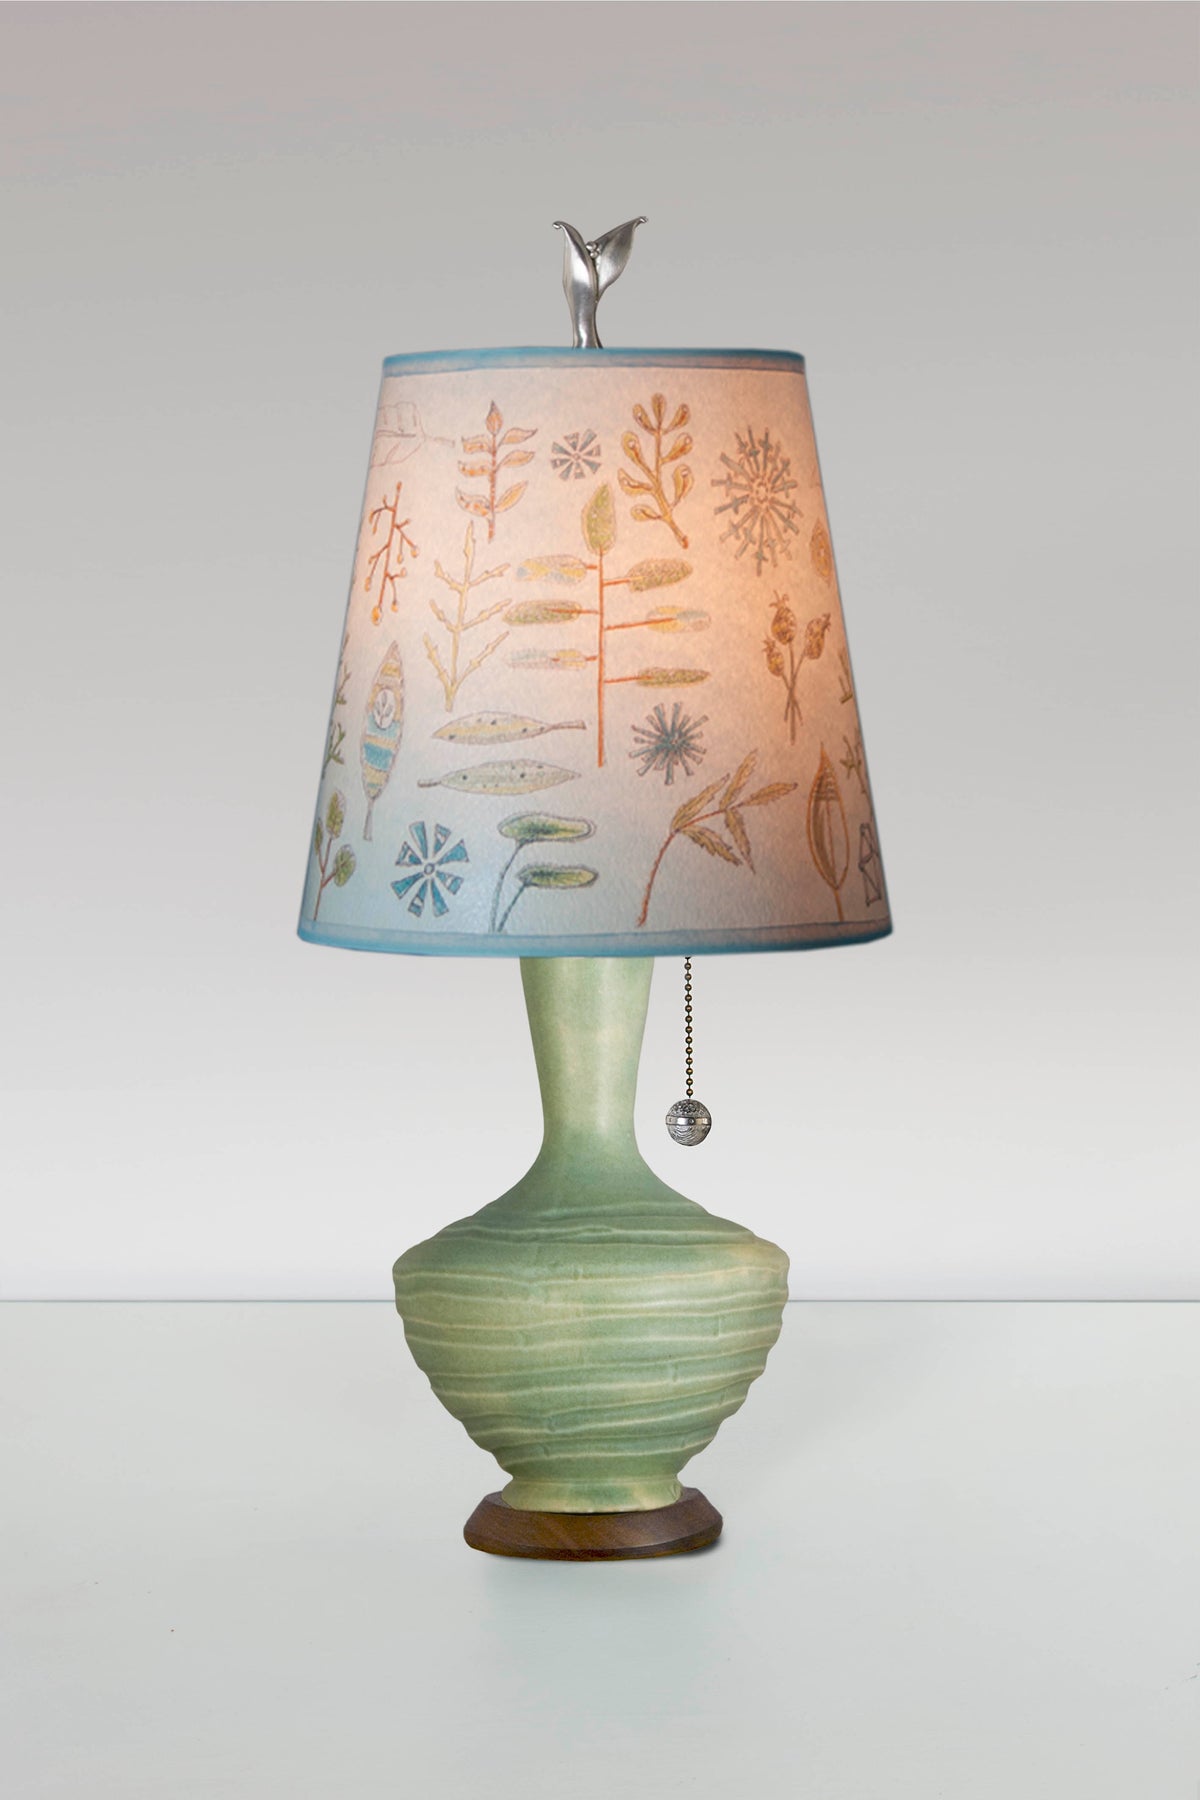 Janna Ugone &amp; Co Table Lamp Ceramic Table Lamp in Old Copper with Small Drum Shade in Field Chart